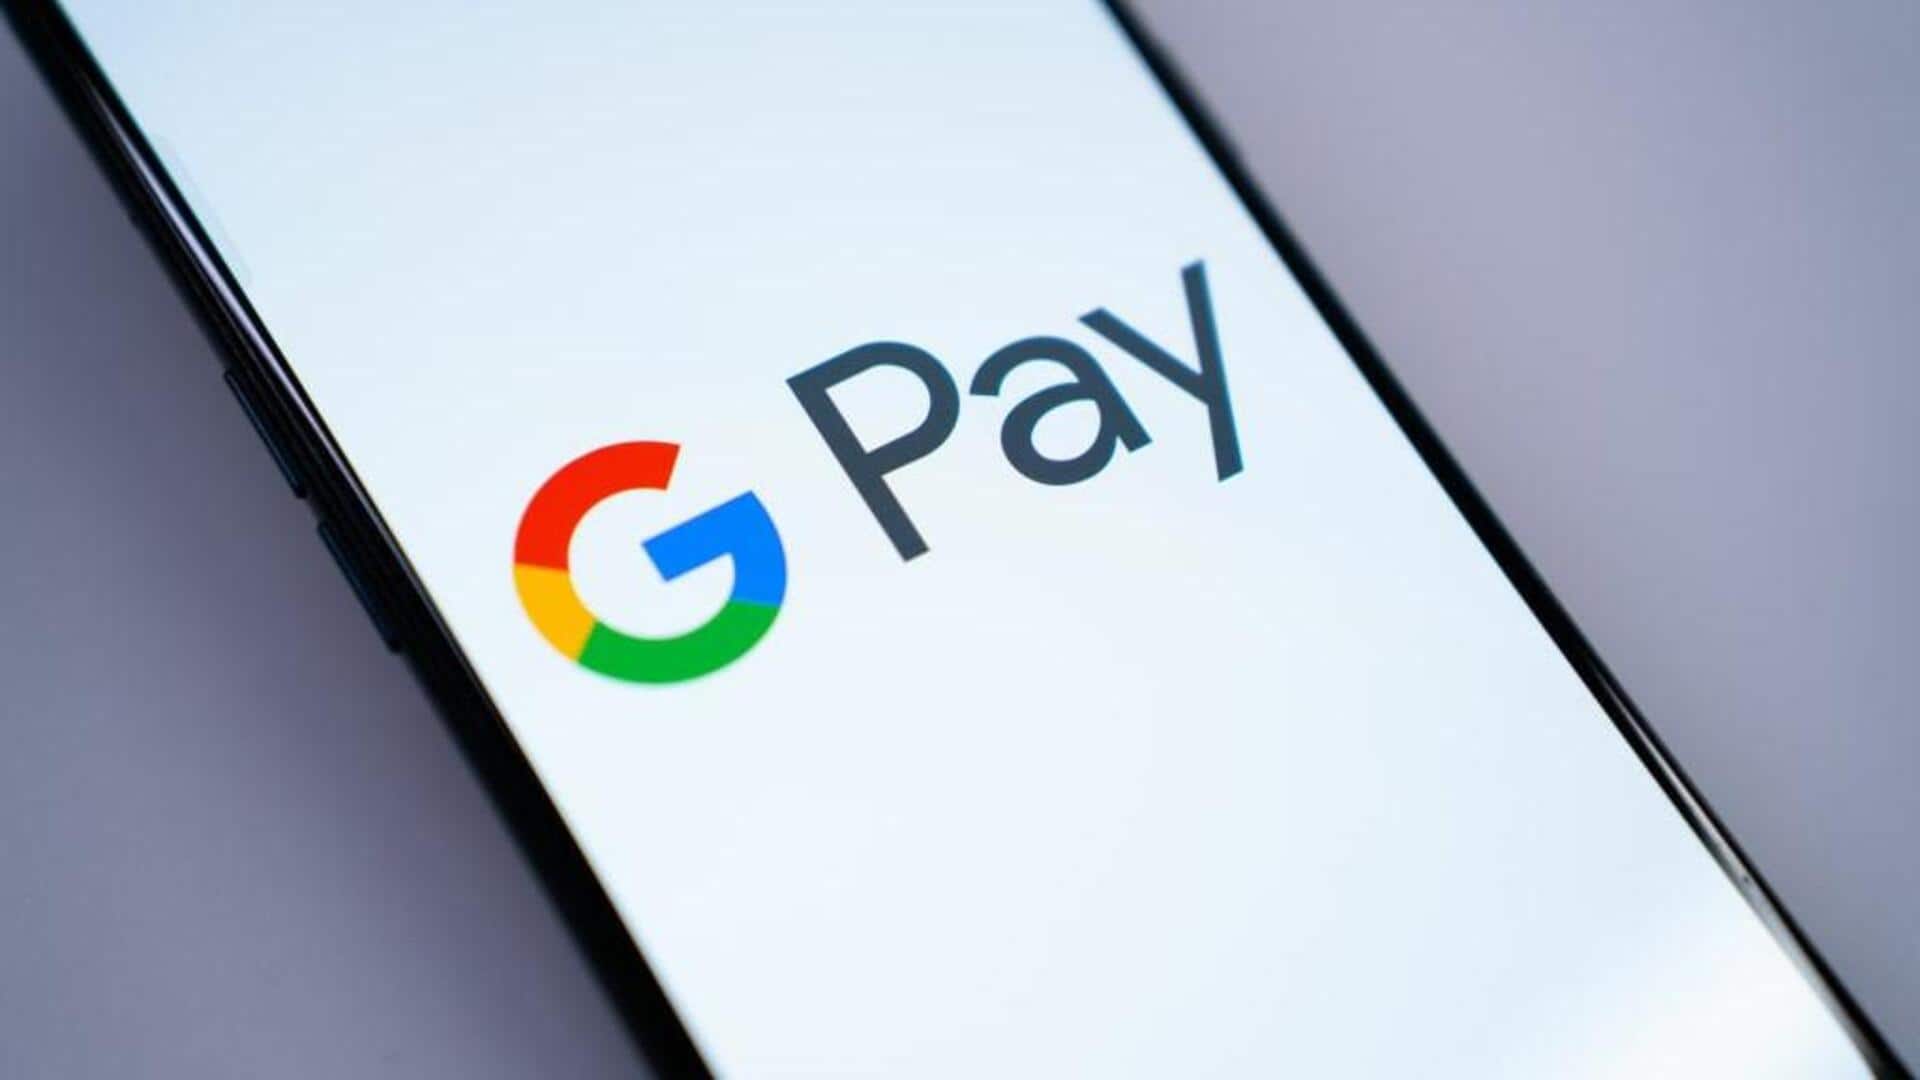 Google Pay introduces 'Open Wallet' shortcut: Know its significance